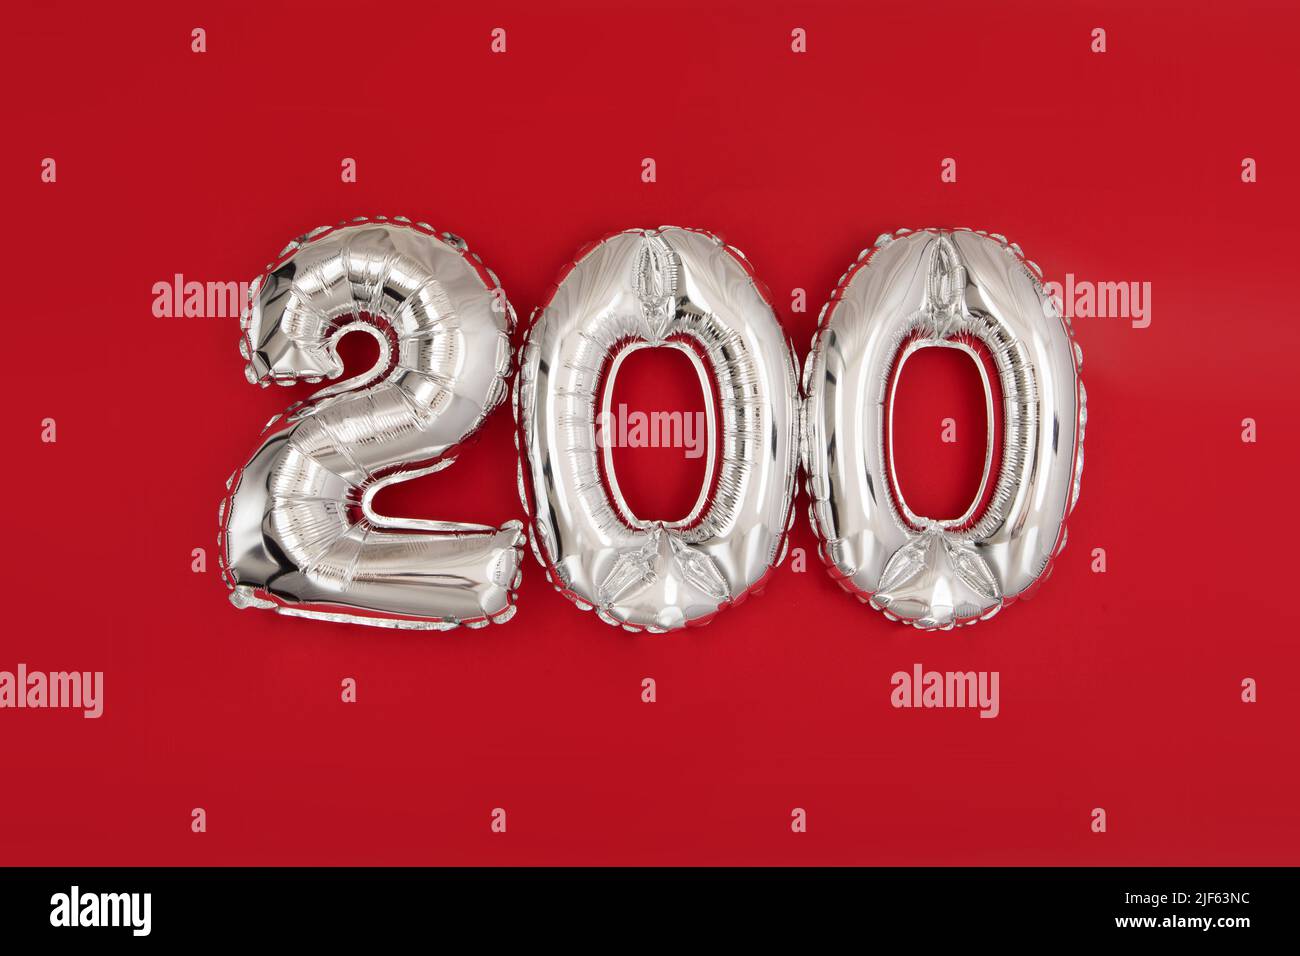 Silver balloon showing number 200 on red background Stock Photo